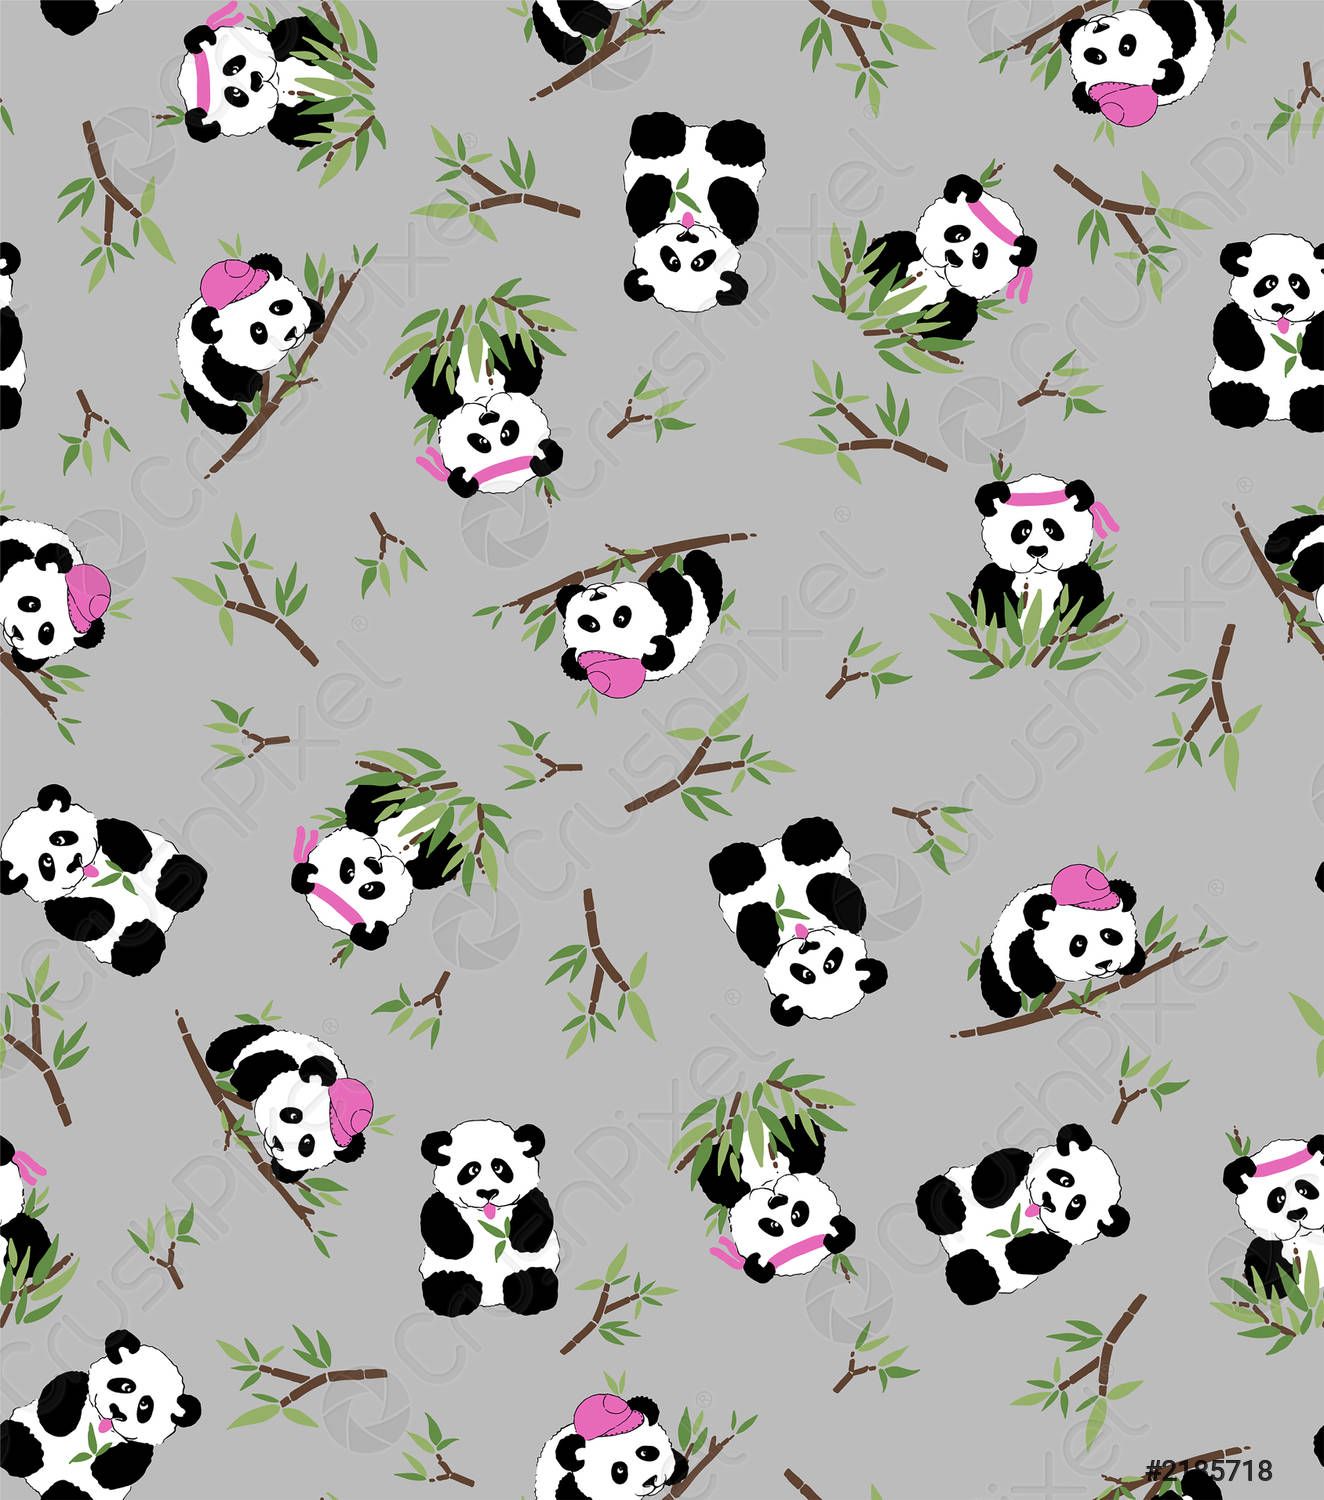 Panda and bamboo, grey background Vector seamless pattern, postcards